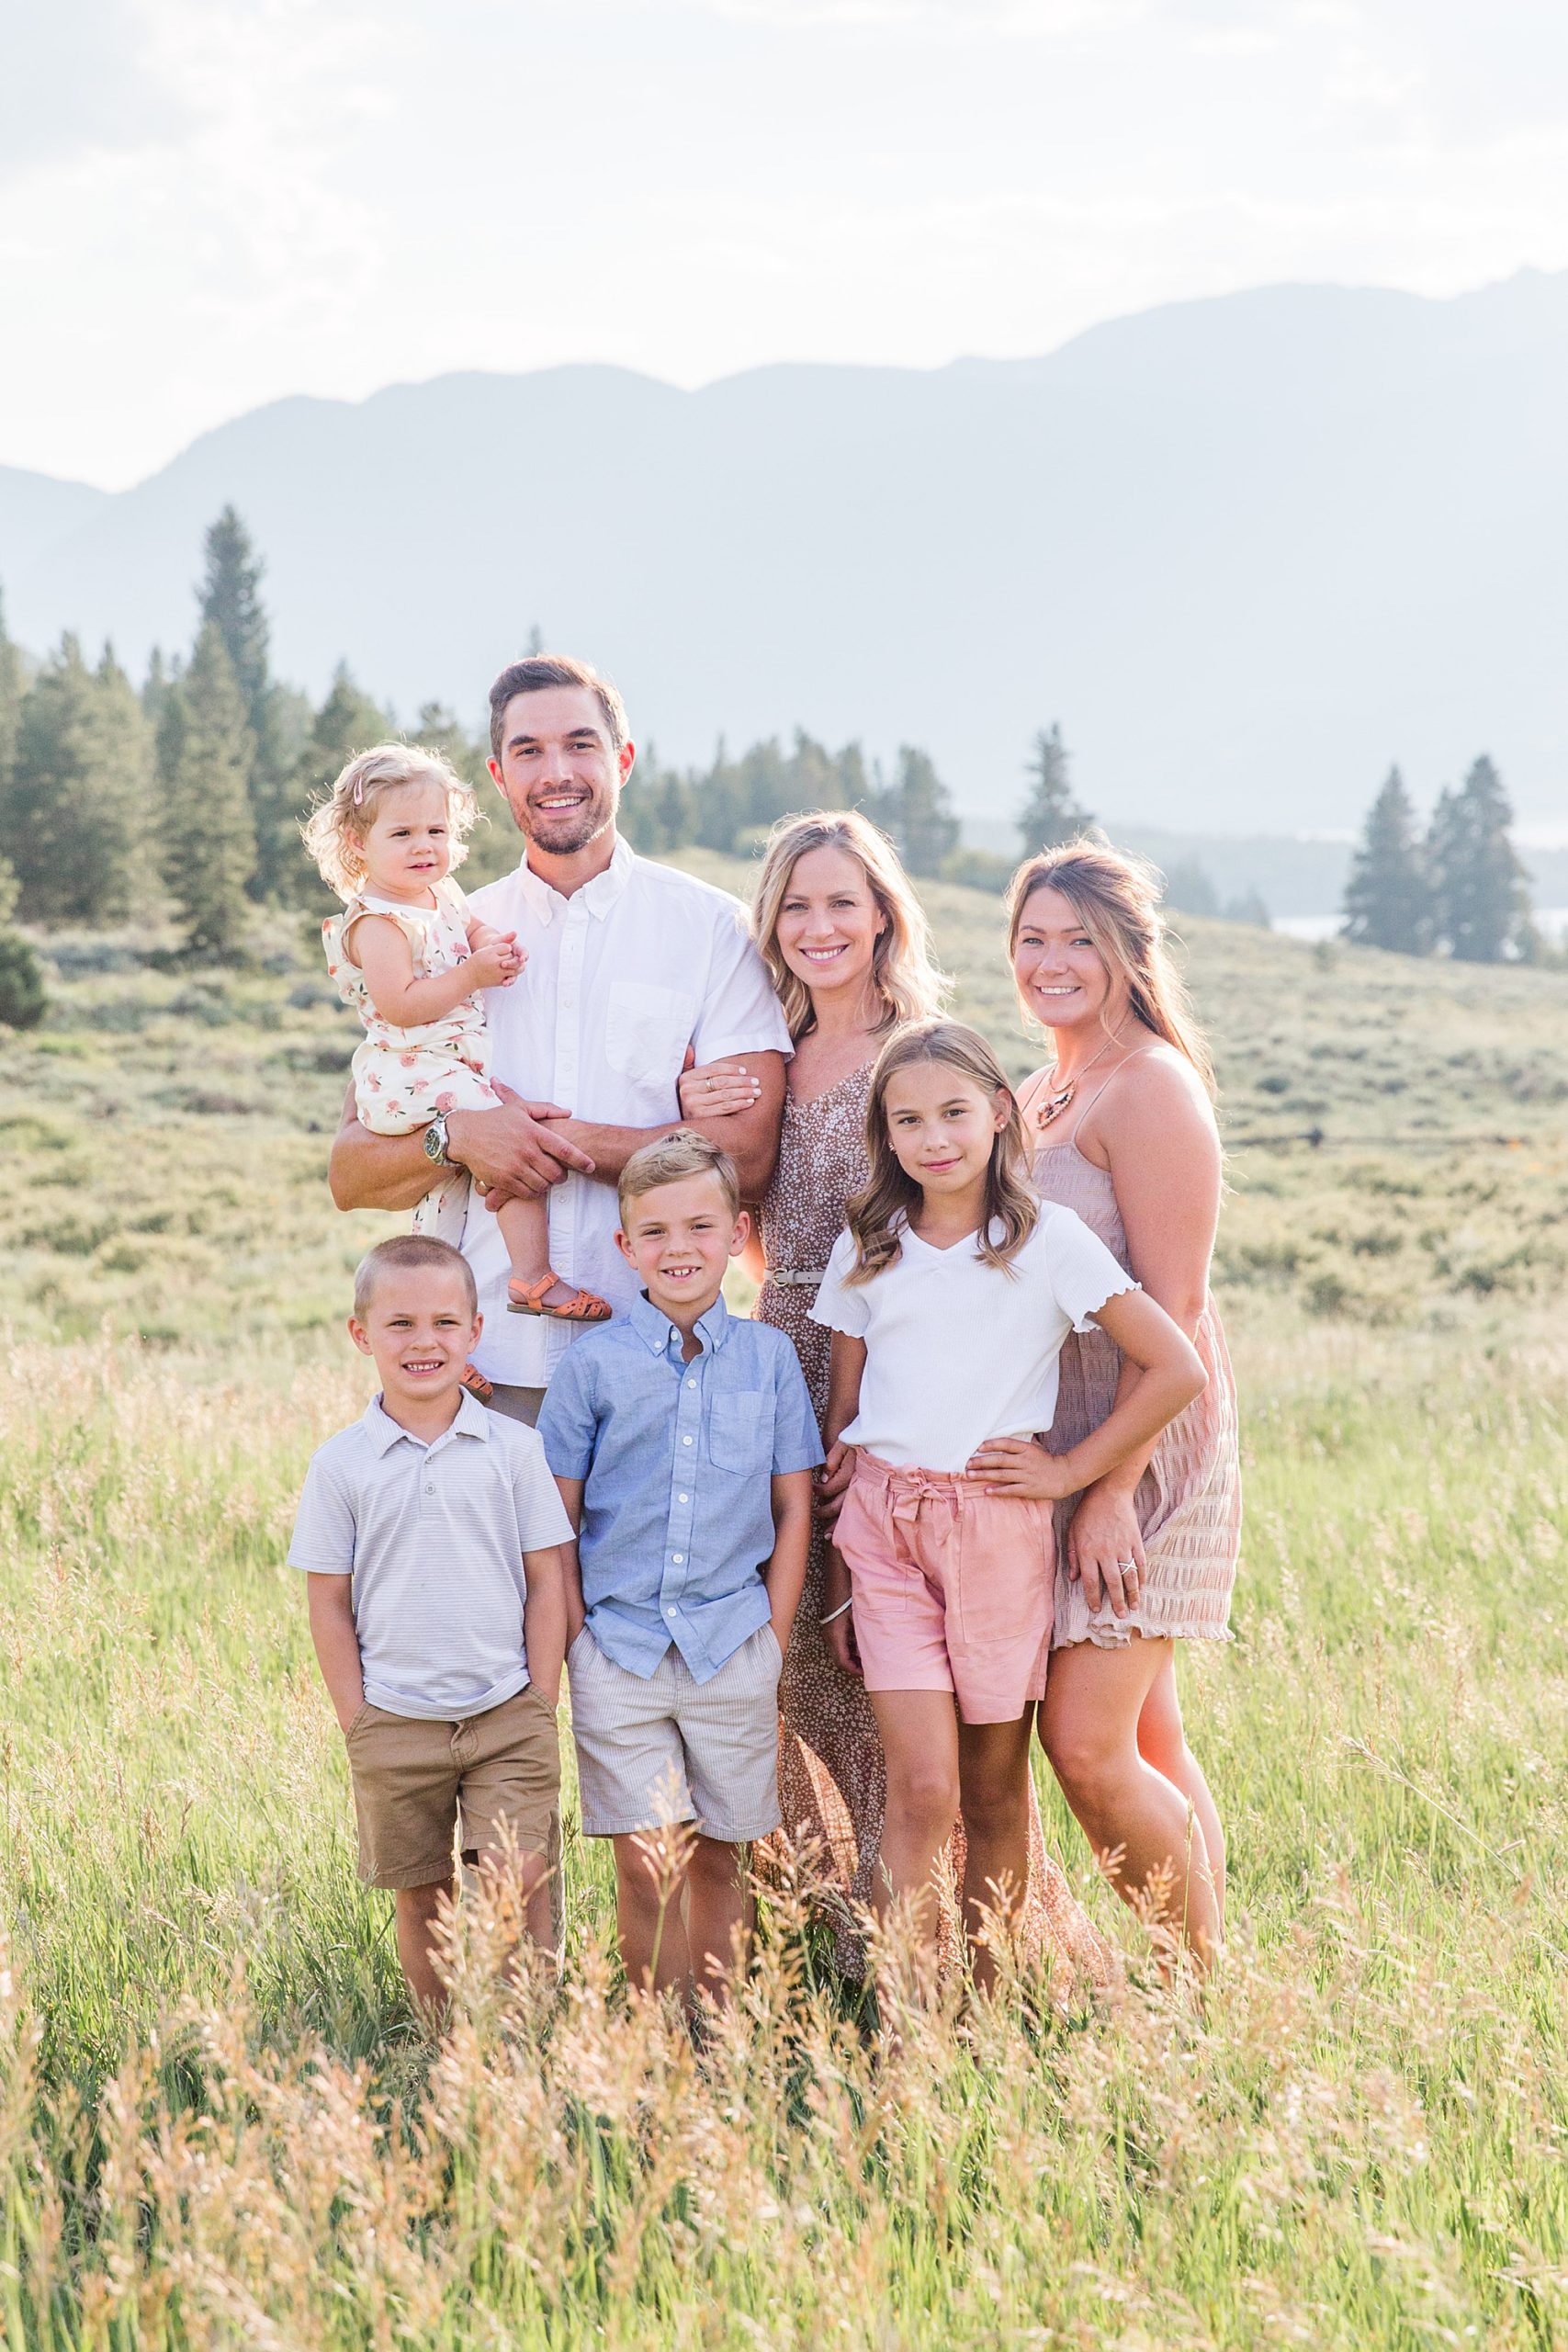 Family style guide | Tips for styling your family photos by CO family photographer Catherine Chamberlain Photography